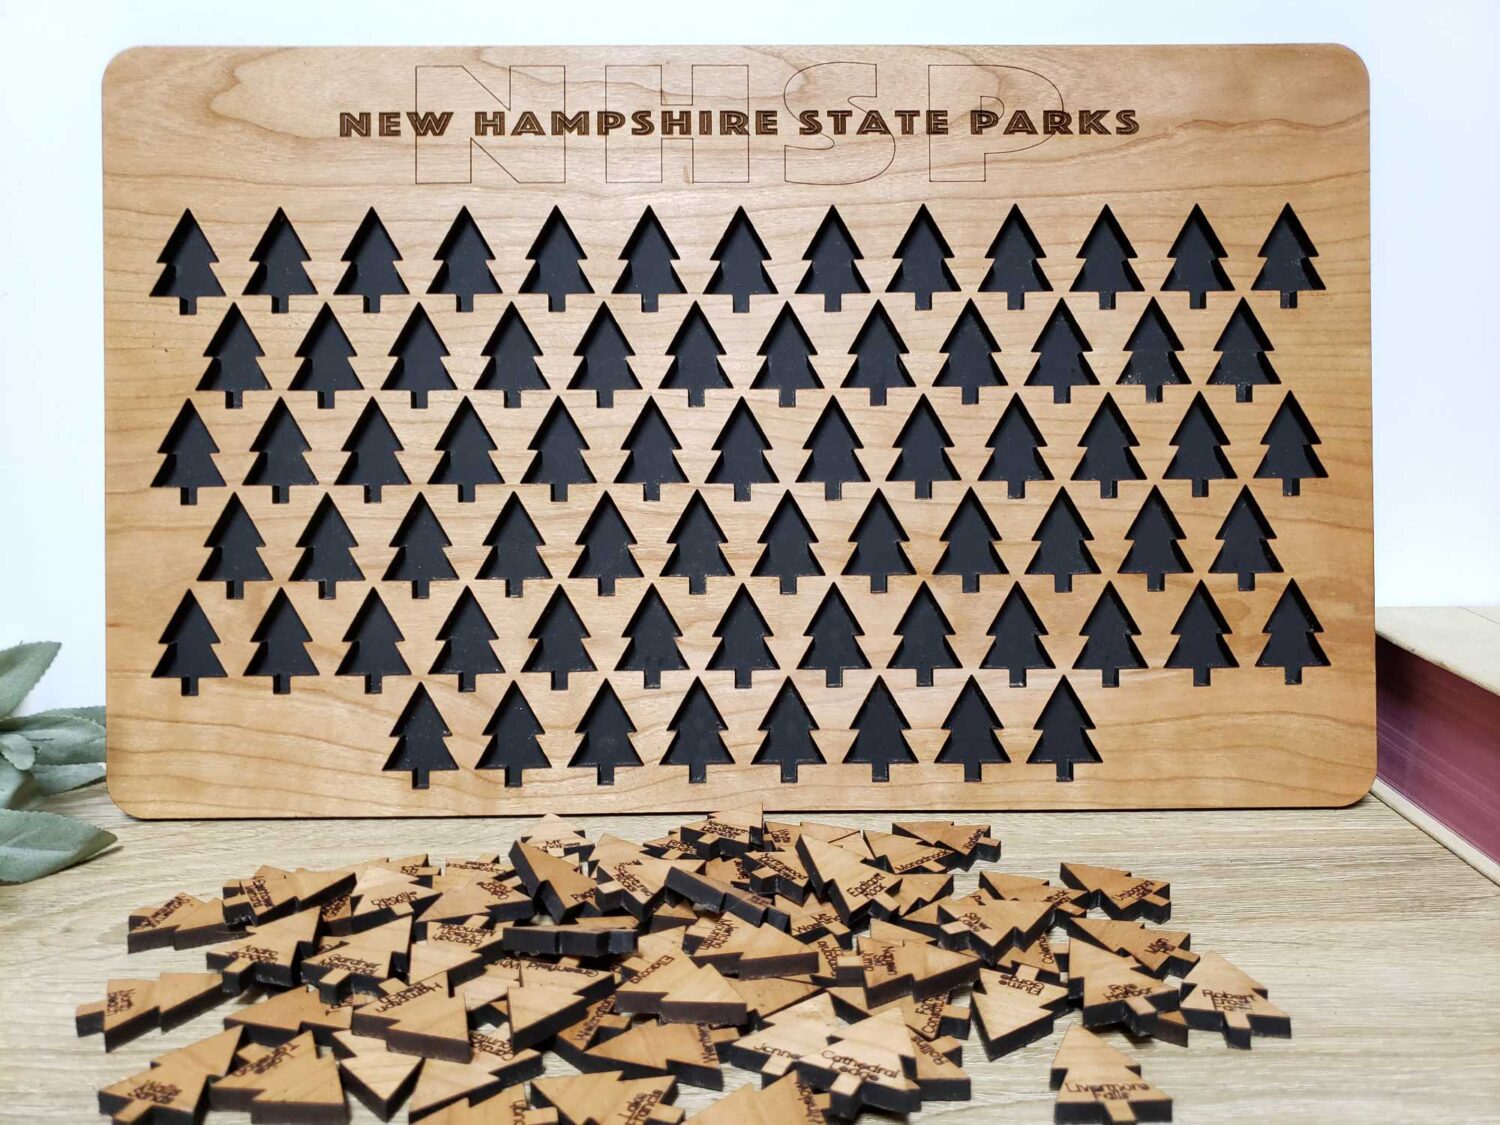 Bucket List Tracker Boards for the NH48, 52 With a View, and New Hampshire State Parks!